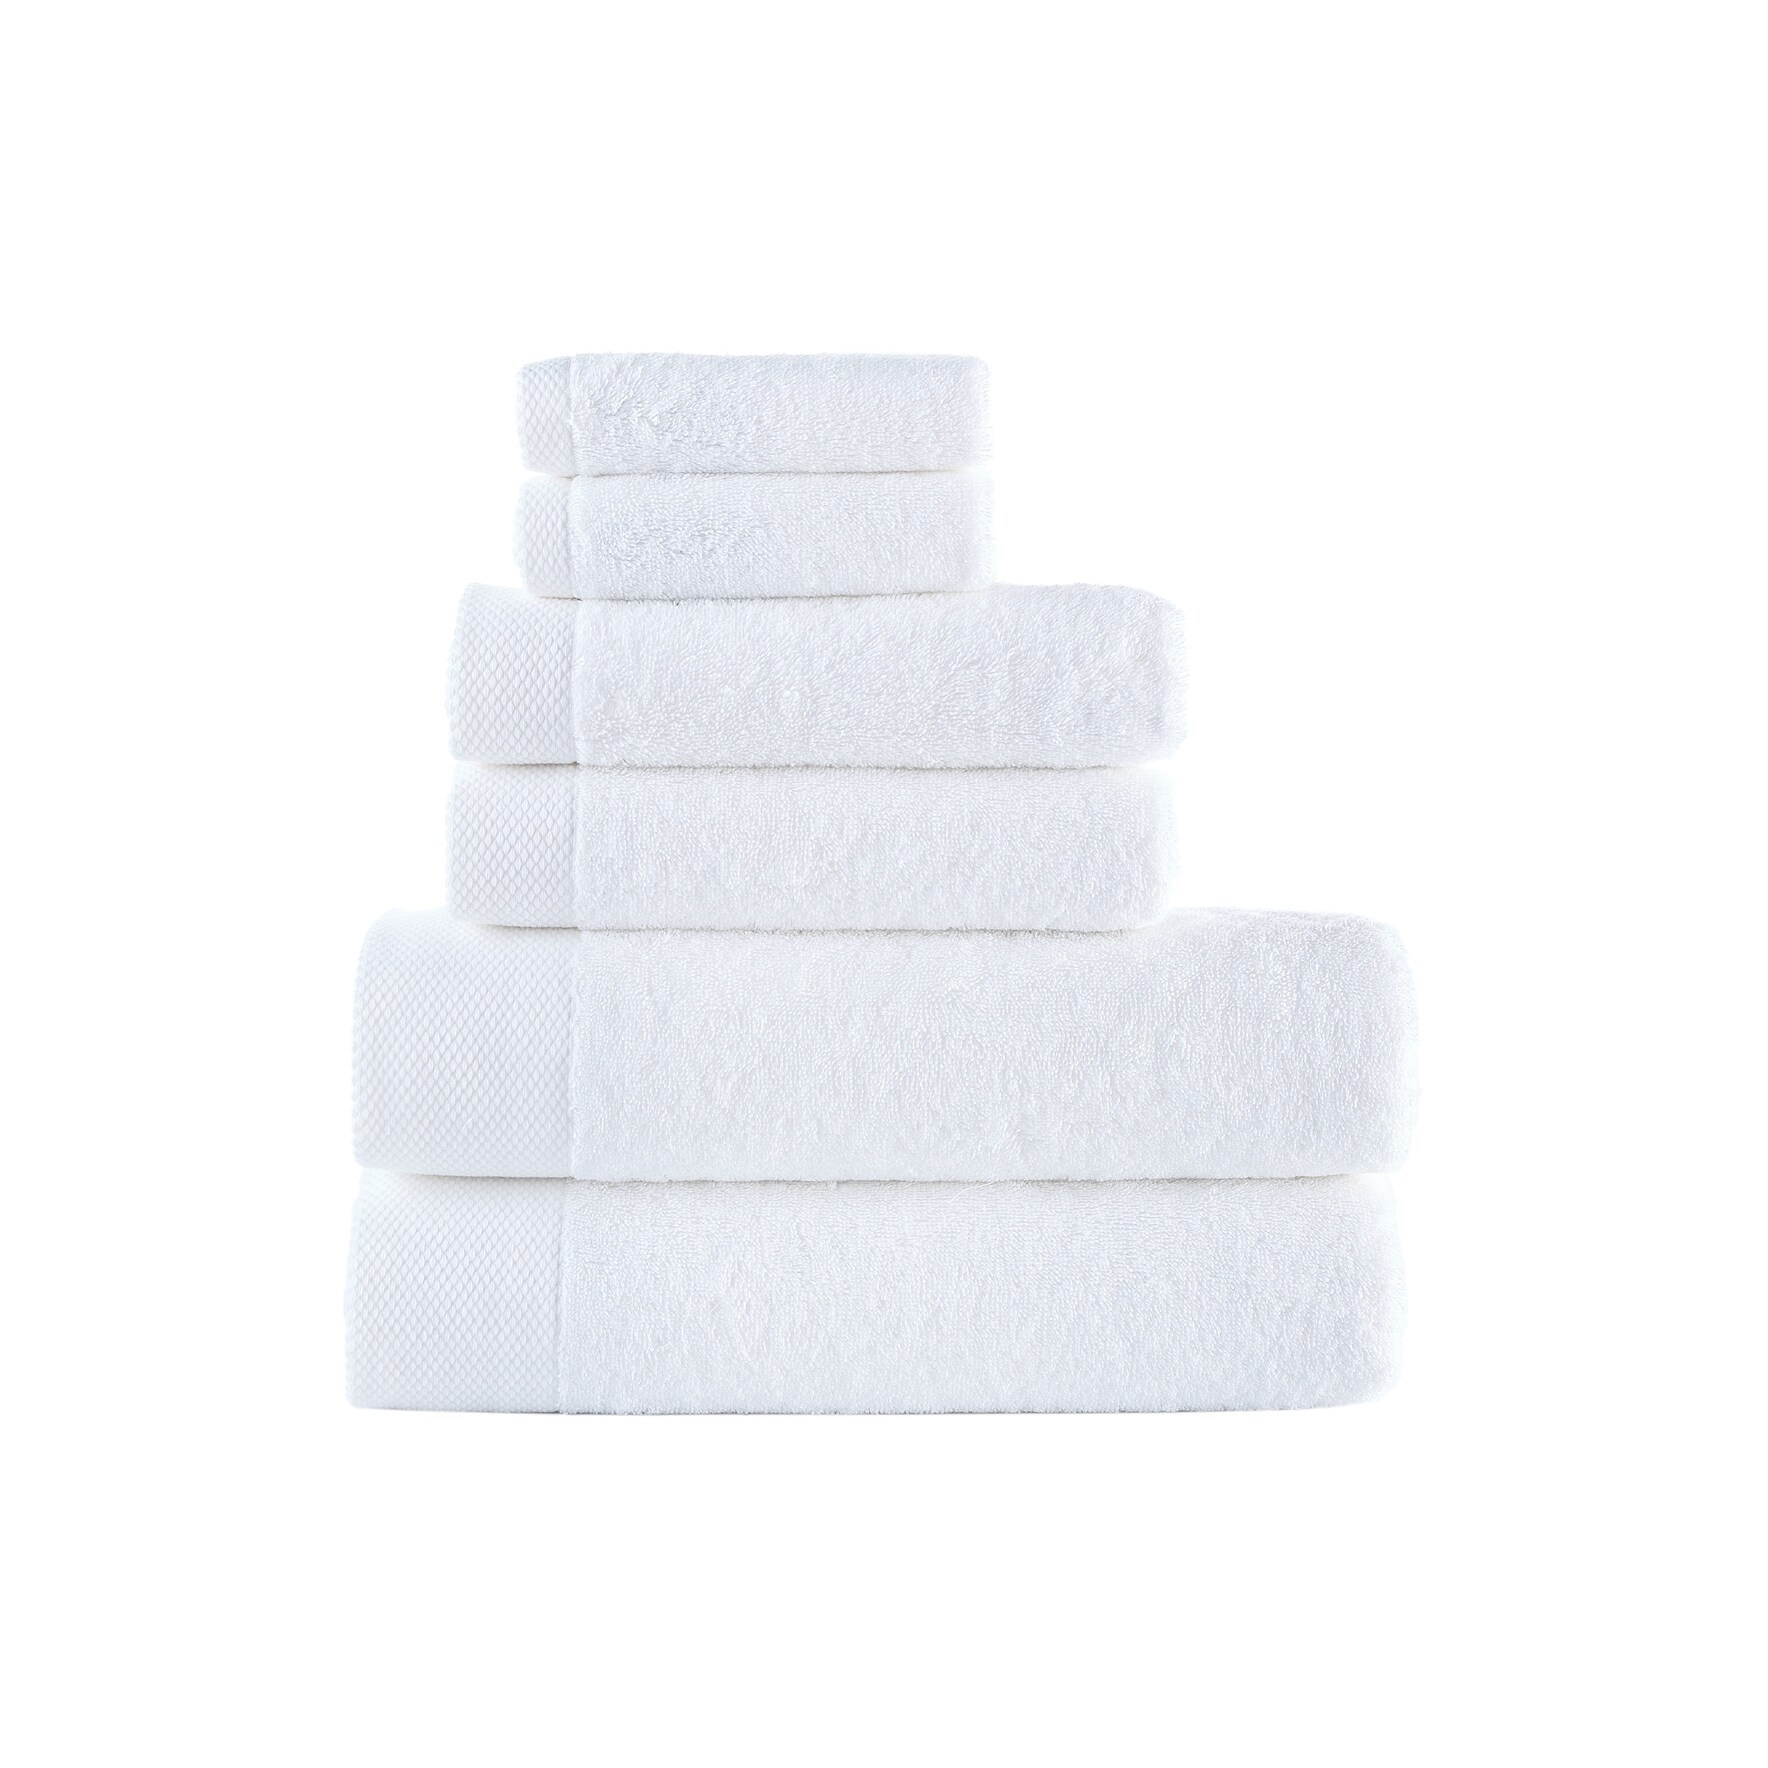 https://ak1.ostkcdn.com/images/products/is/images/direct/ae6ca6ff59c6d8a3f8bbbb21769b958d5e896788/Brooks-Brothers-Solid-Signature-6-pcs-Towel-Set.jpg